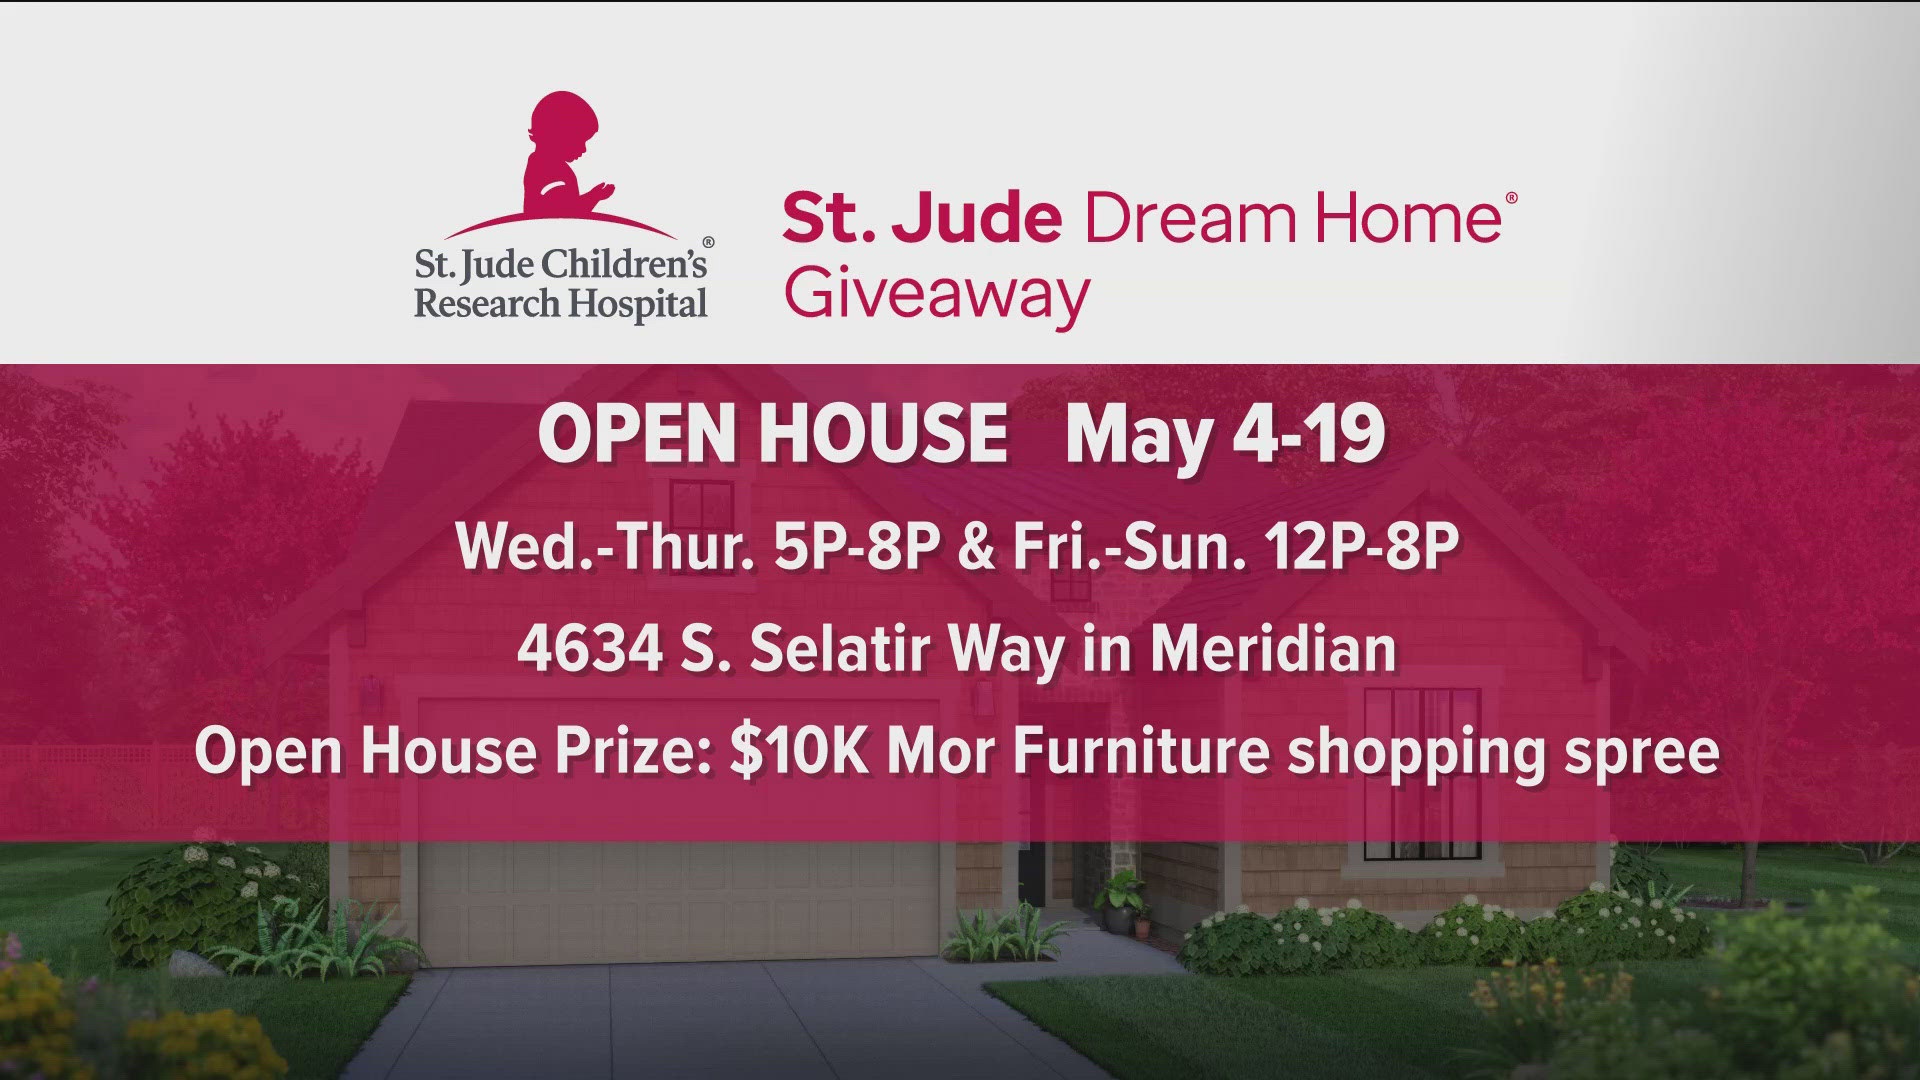 The open house event goes from, May 4th through the 19th.